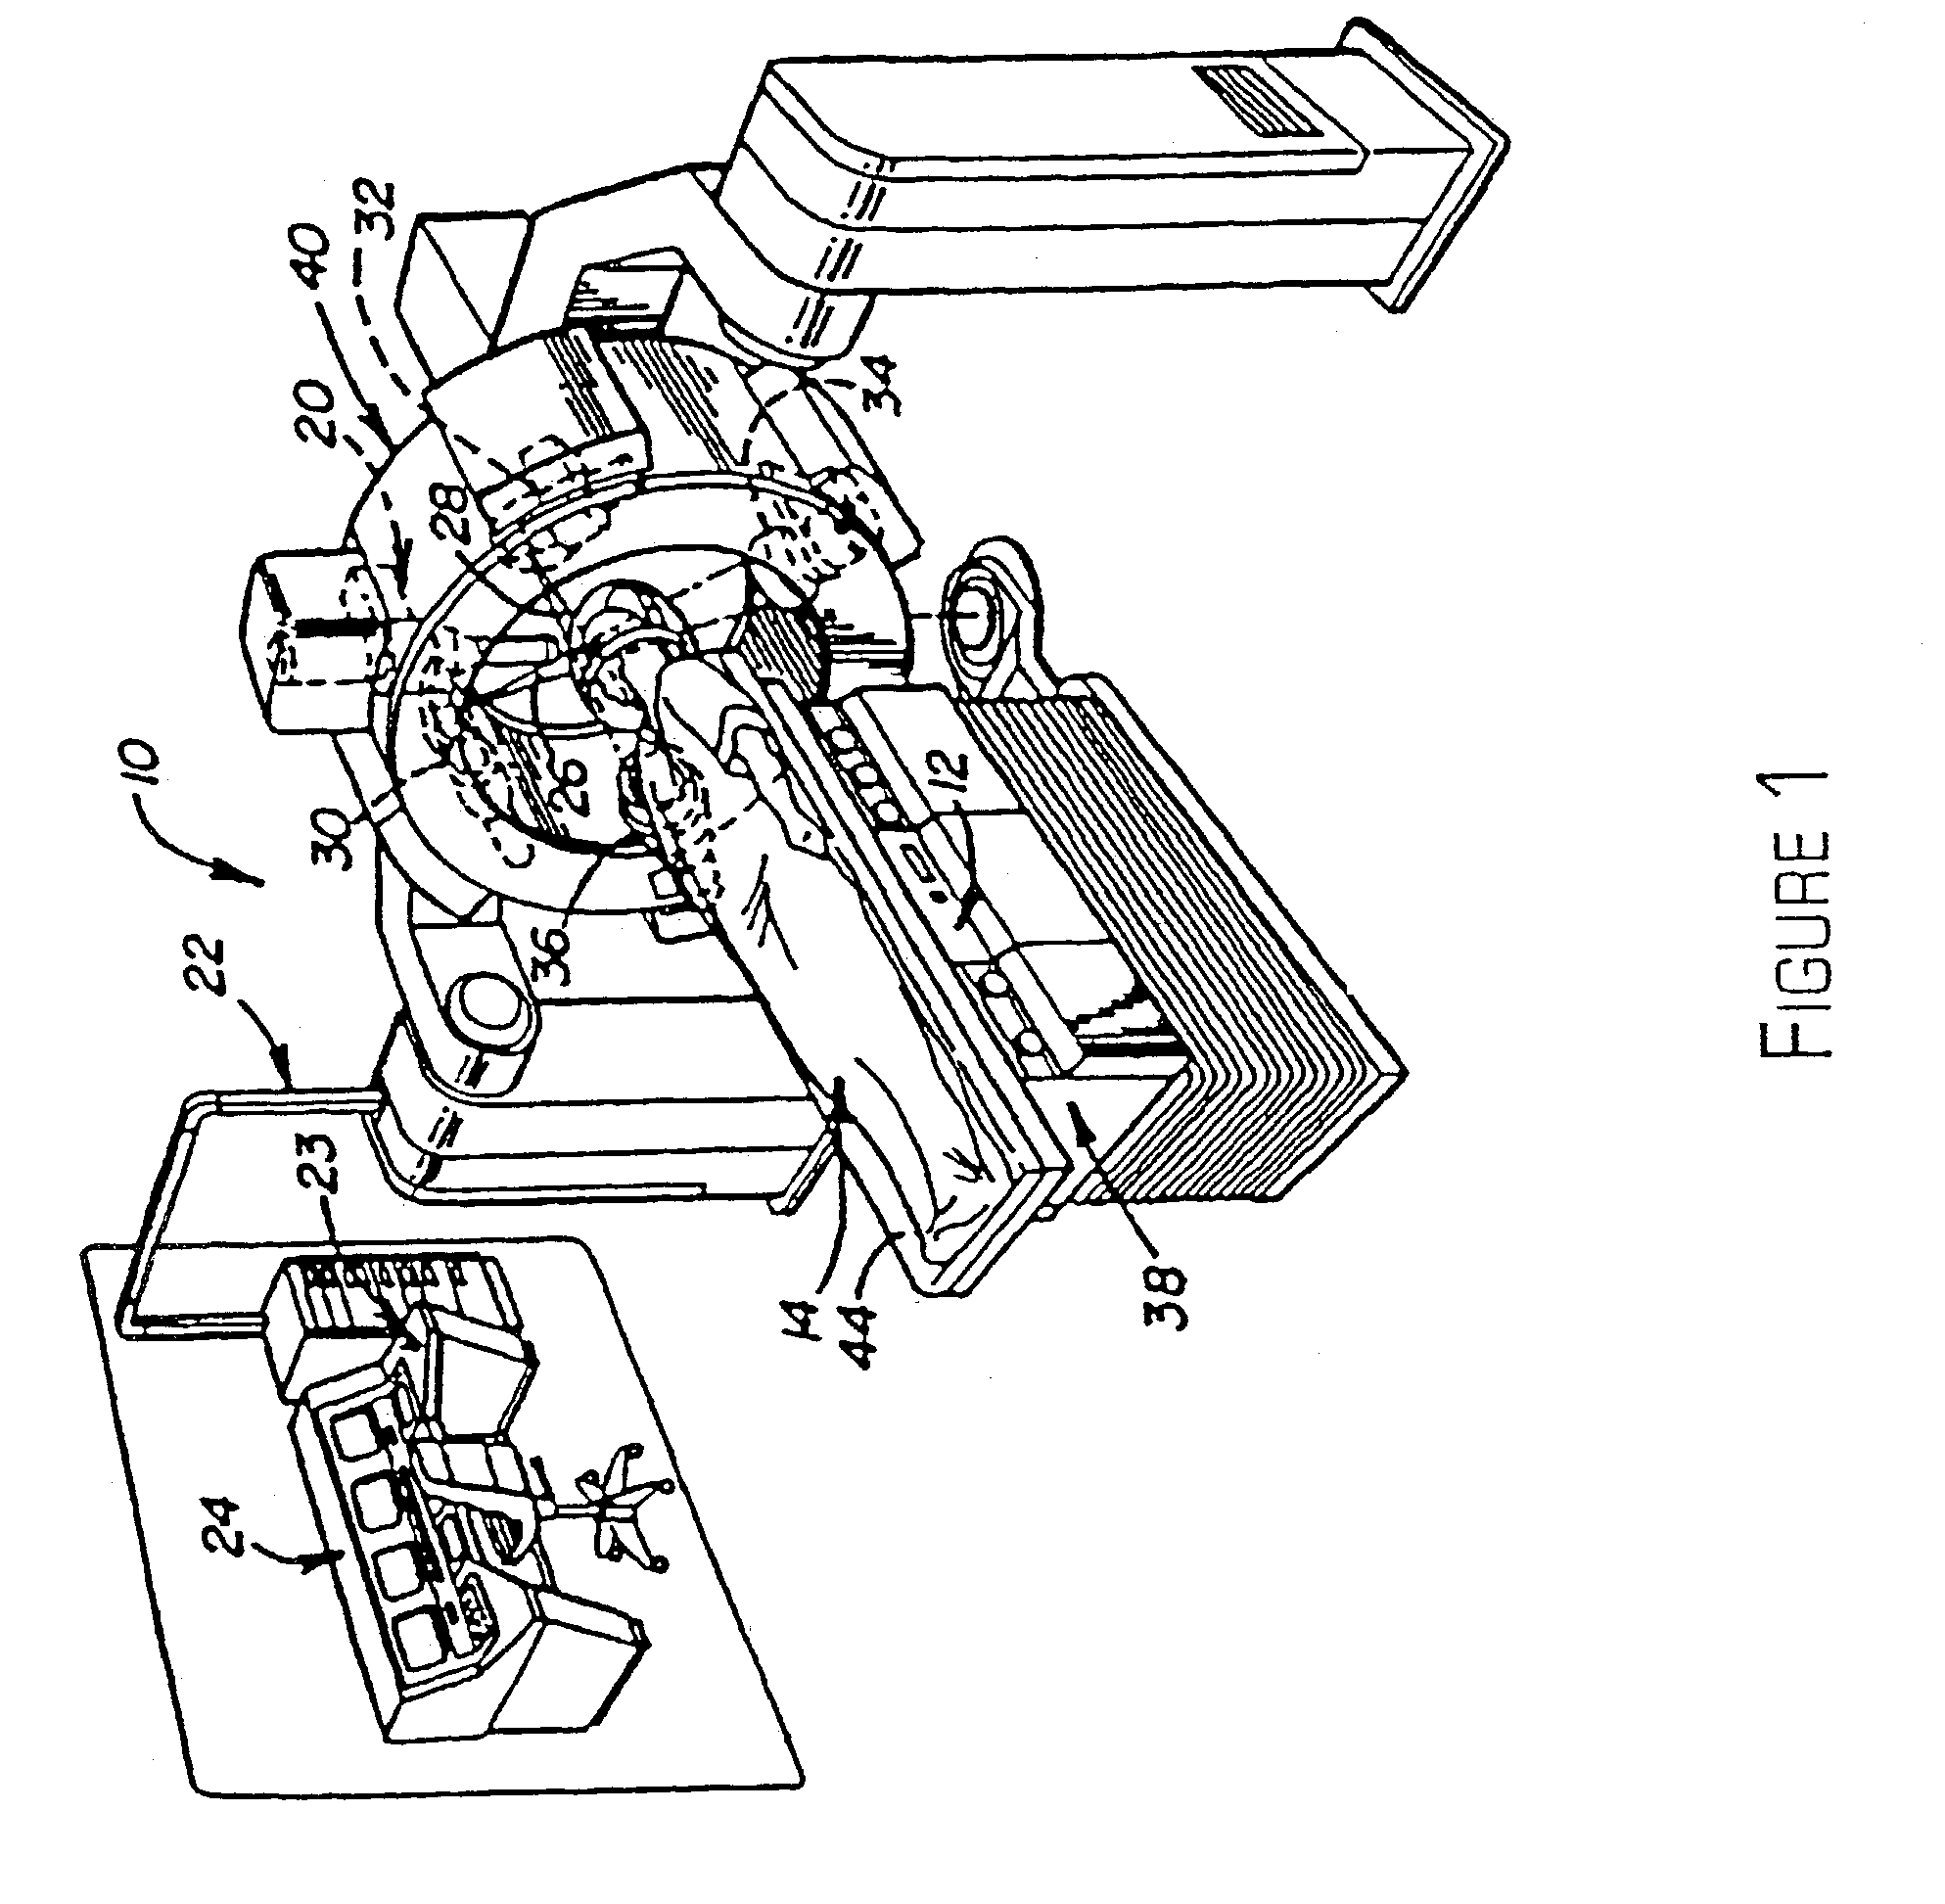 Apparatus and method for compensating for respiratory and patient motion during treatment